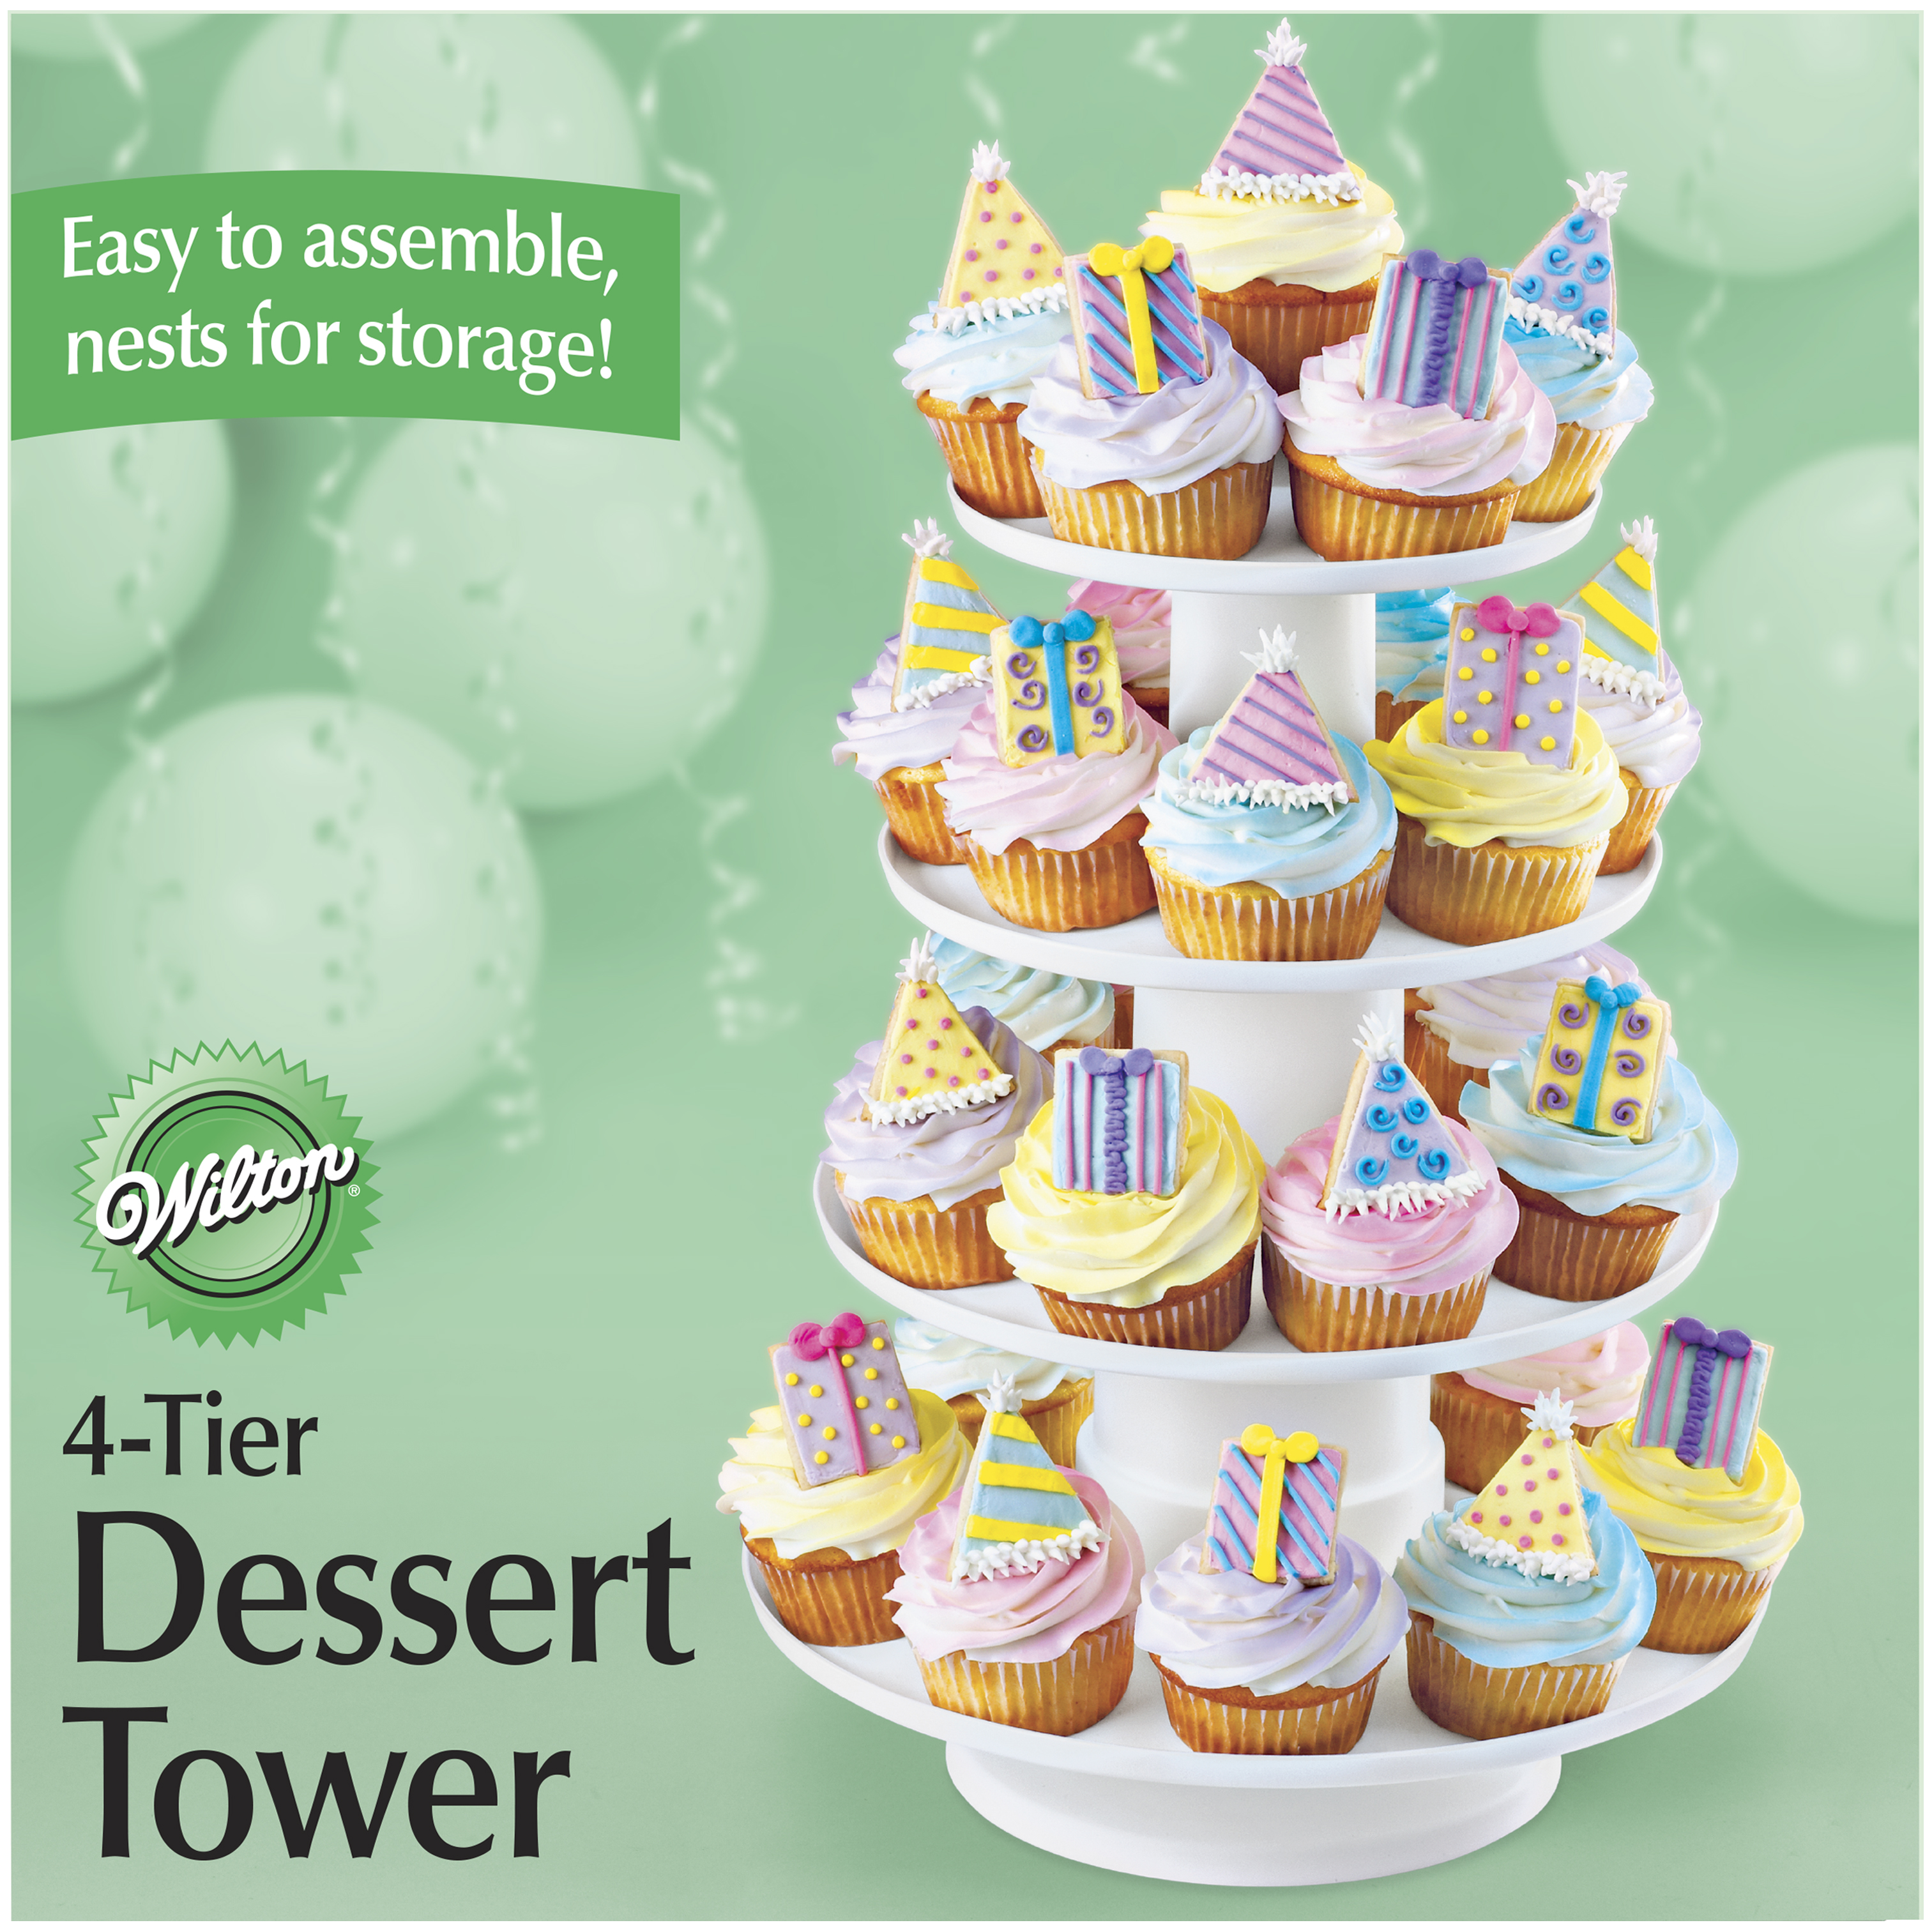 Wilton Stacked 4-Tier Cupcake and Dessert Tower - image 2 of 4